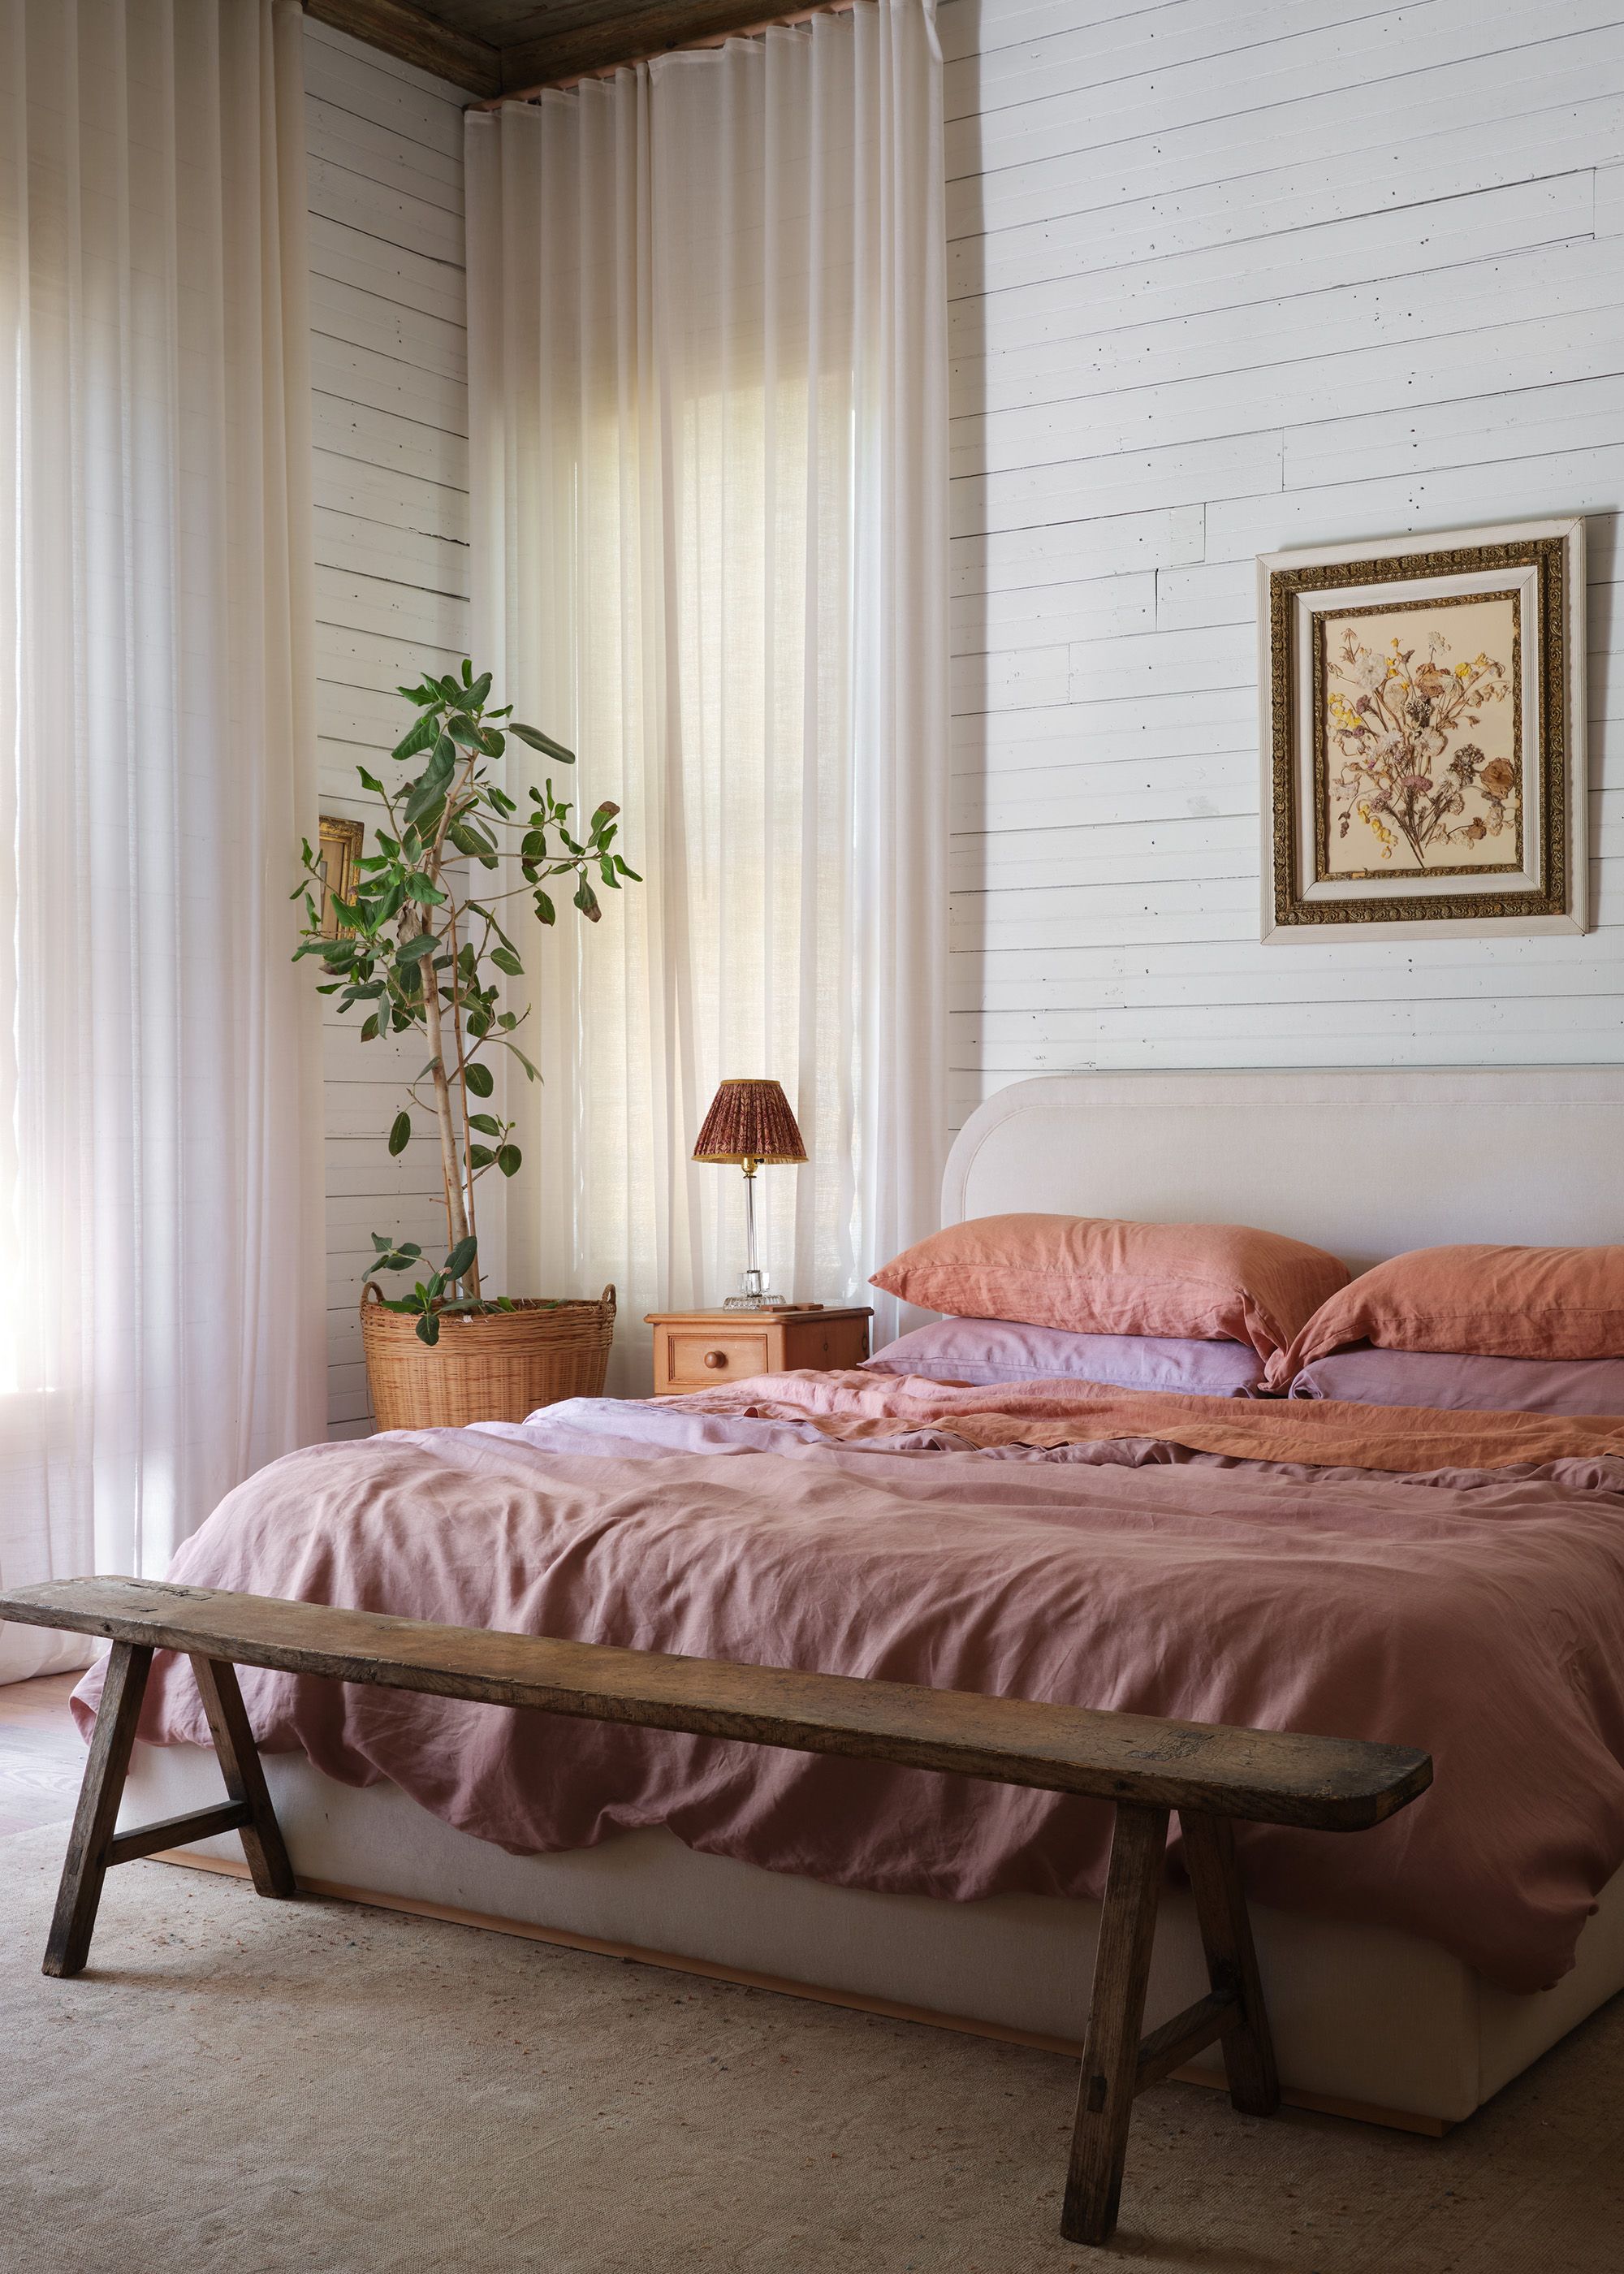 Do You Really Need a Top Sheet? 6 Experts Weigh In – Bed Threads